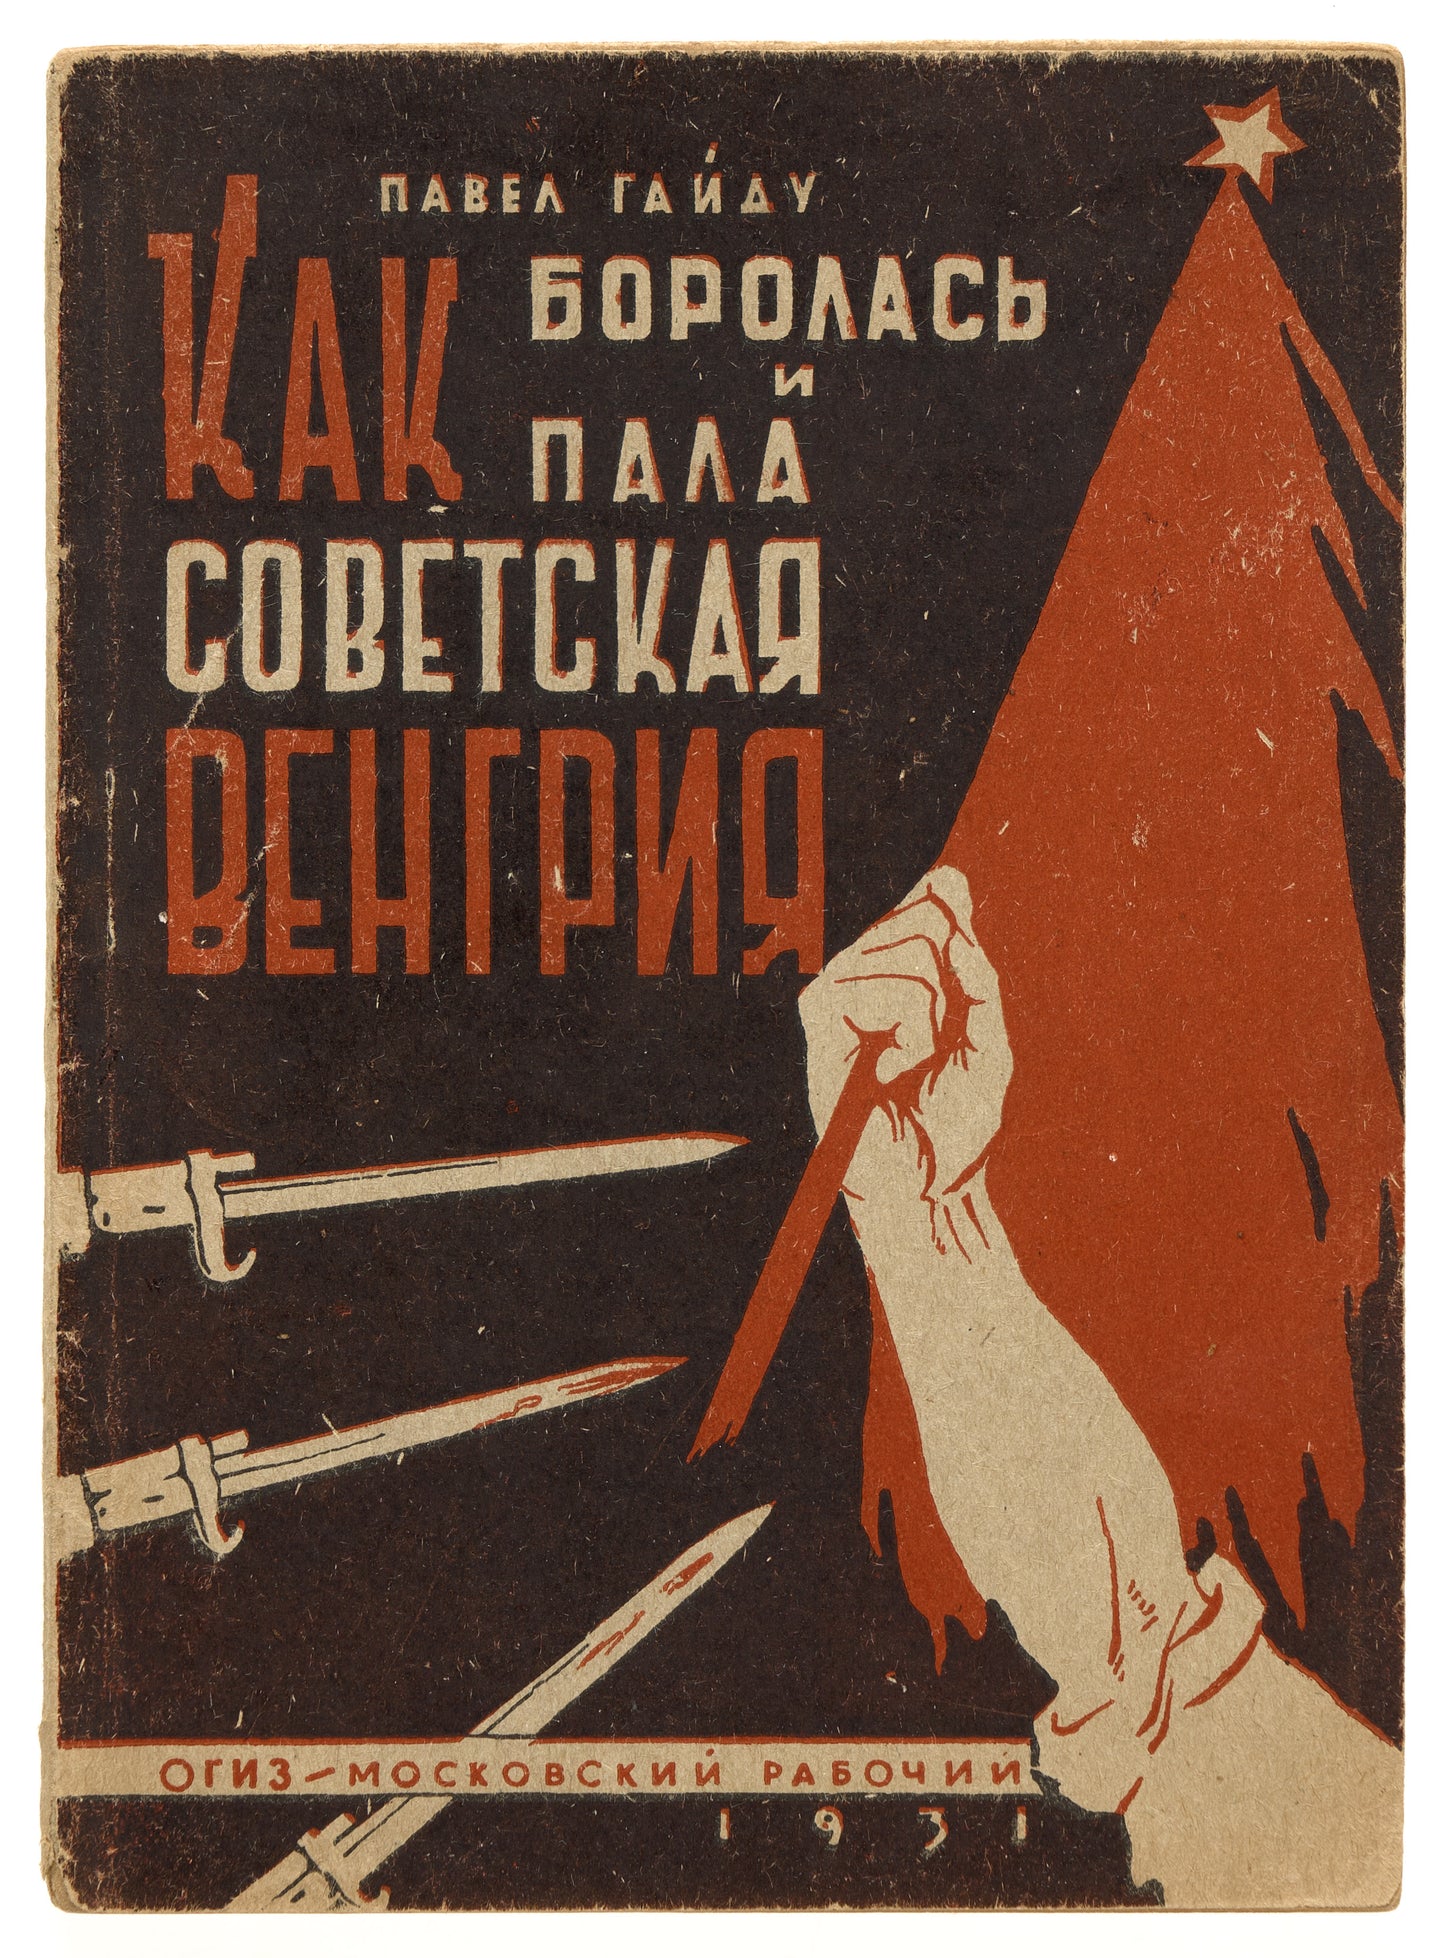 How Soviet Hungary Fought and Fell. Banned book by Hungarian communist.